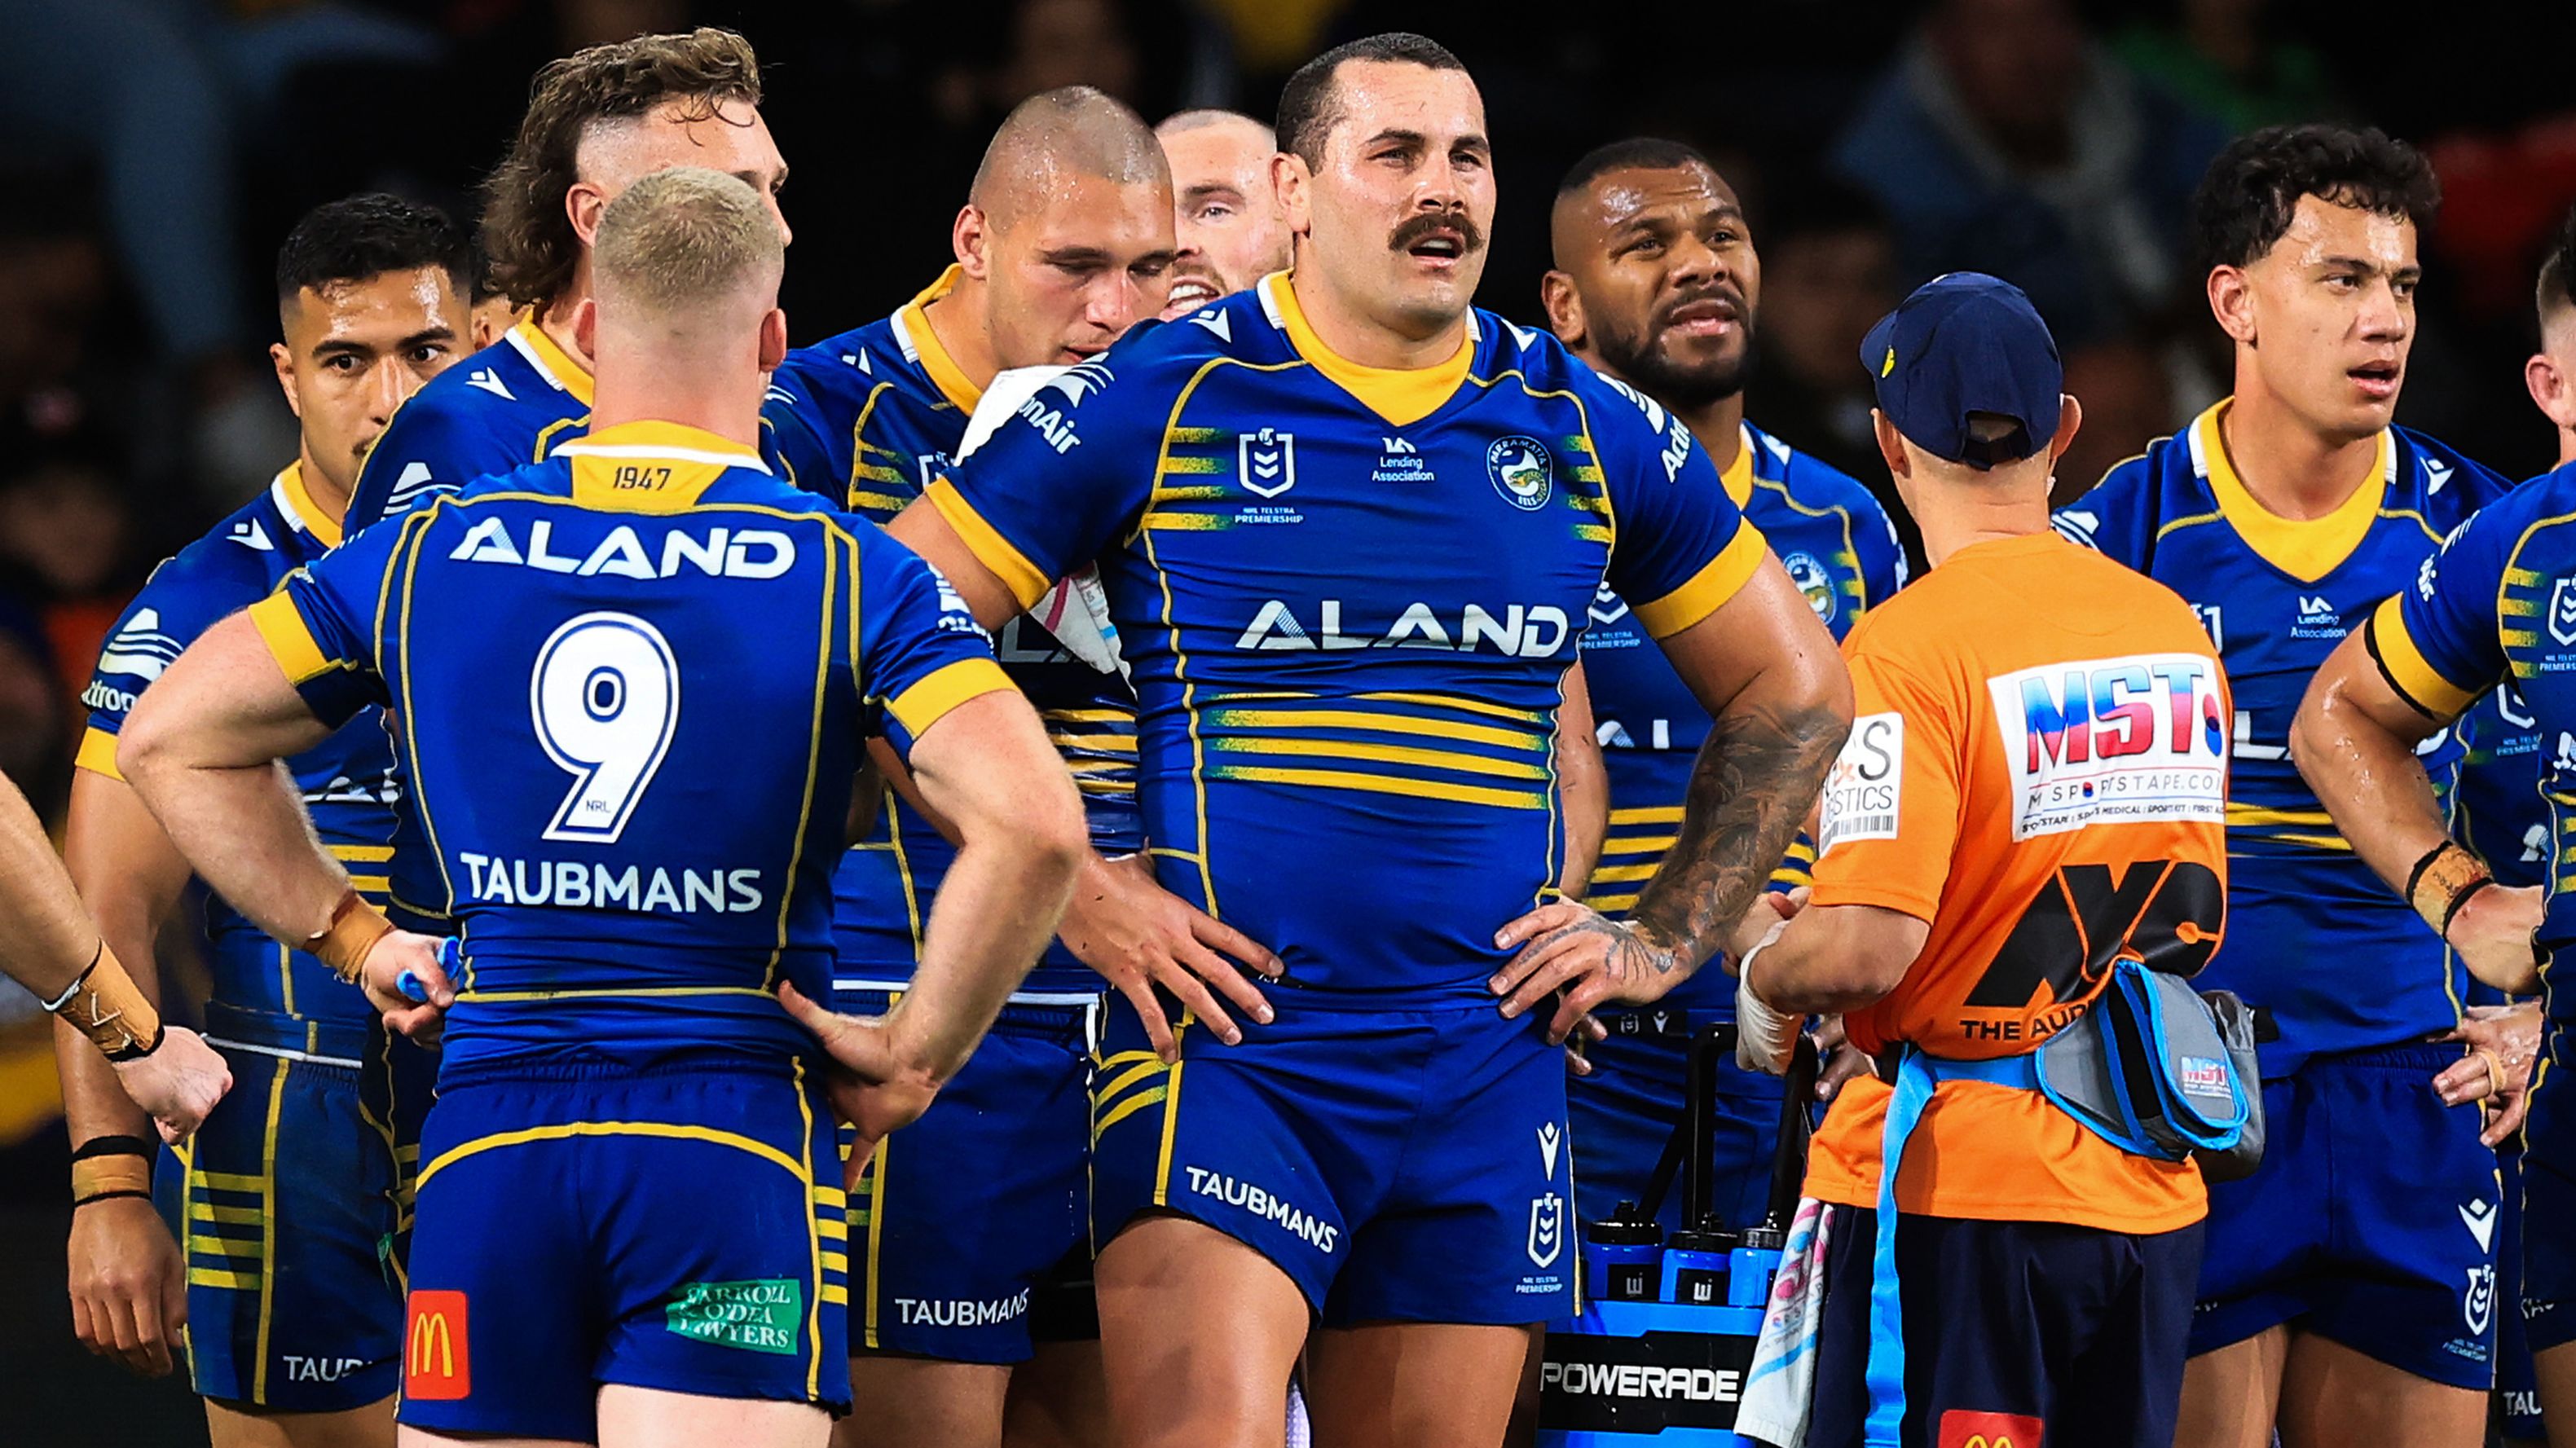 Eels players look on after a Roosters try during the round 25 NRL match between Parramatta Eels and Sydney Roosters at CommBank Stadium on August 18, 2023 in Sydney, Australia. (Photo by Mark Evans/Getty Images)